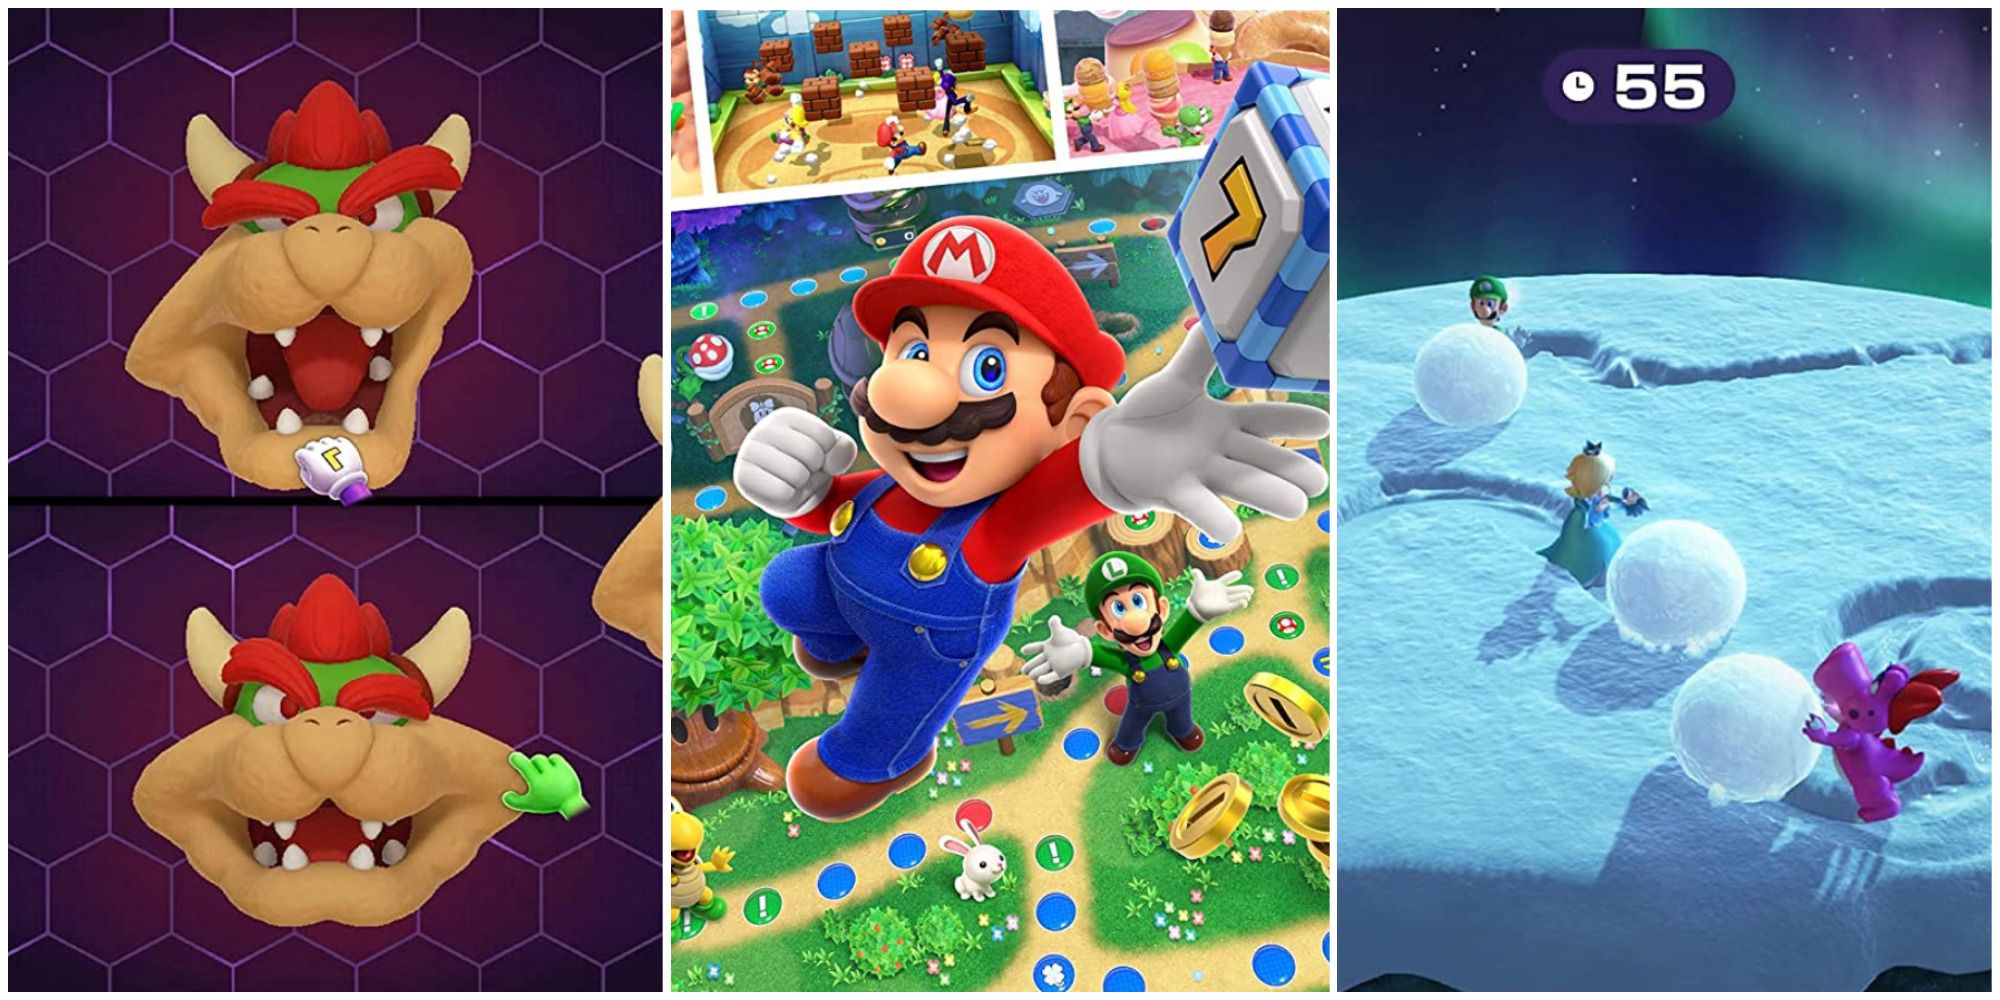 bowser minigame, mario with dice block, snowball minigame featured